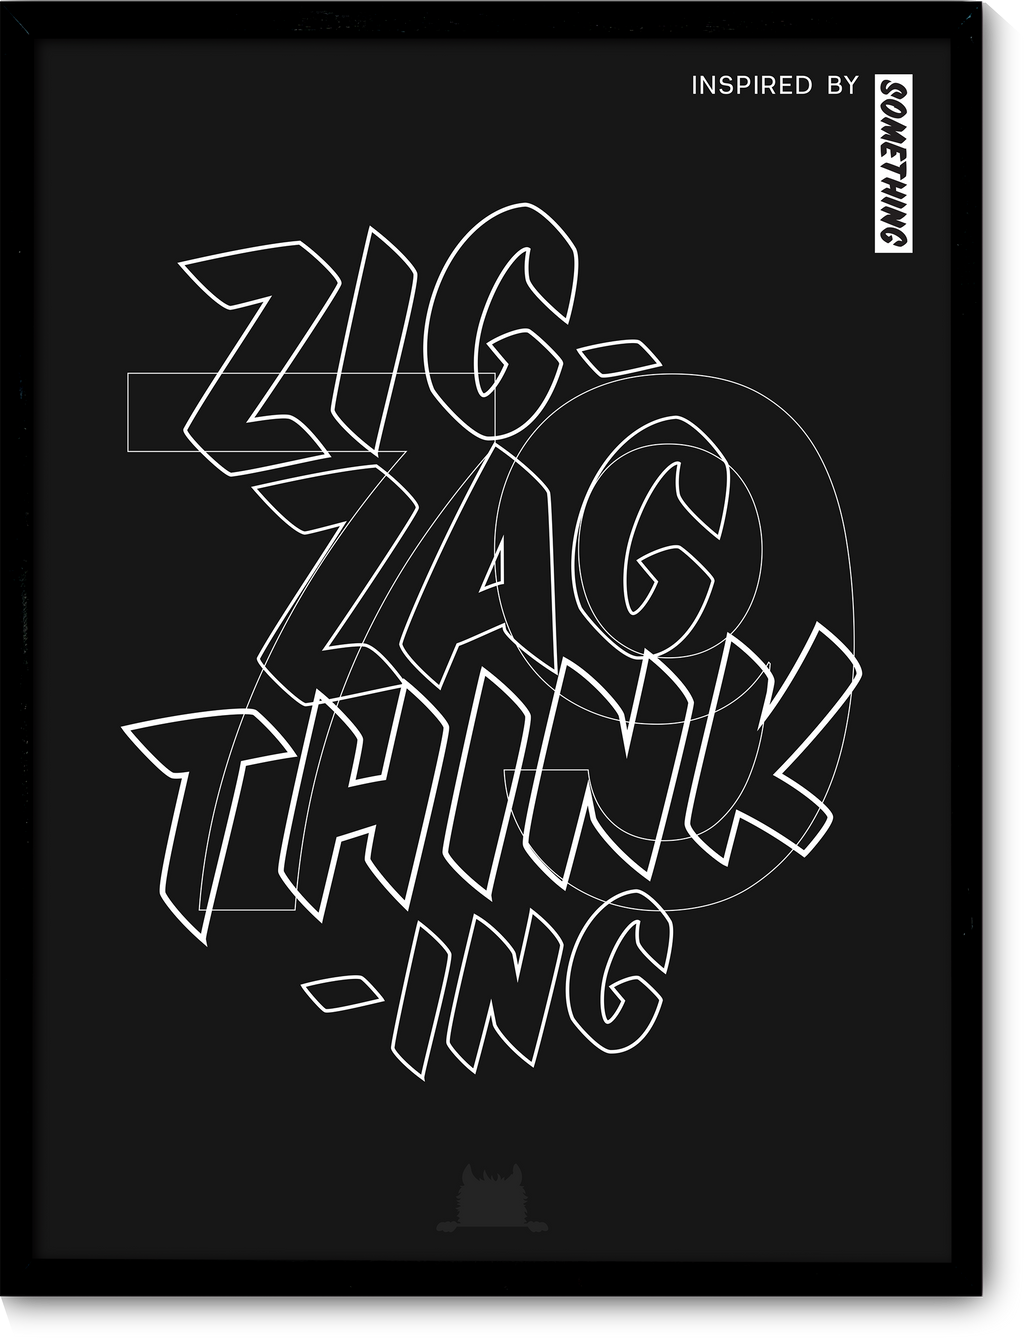 #79 Inspired by zigzag thinking.